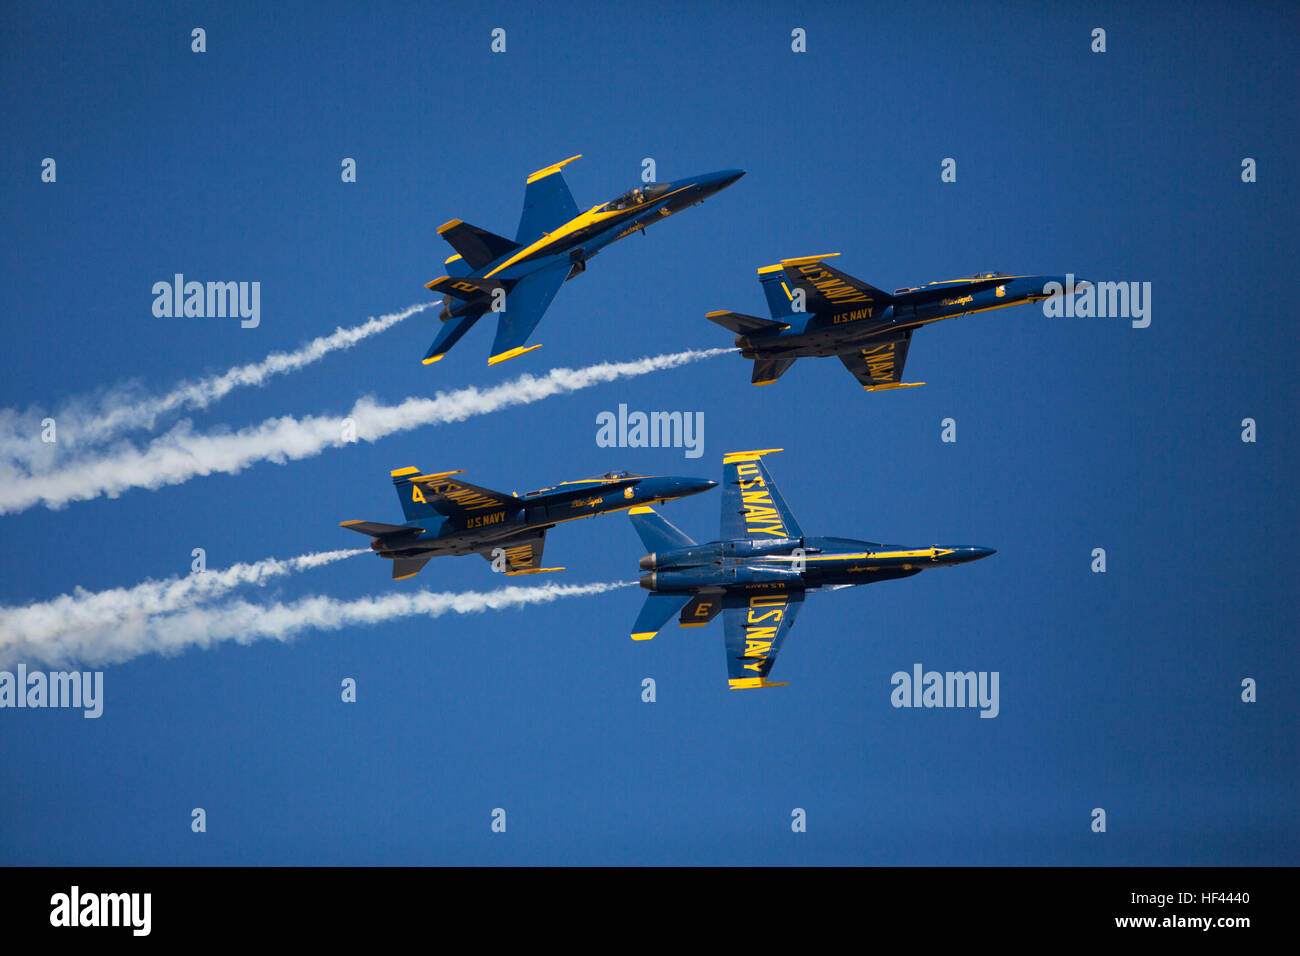 U.S. Navy Blue Angels perform aerobic maneuvers during the 2016 Marine Corps Air Station (MCAS) Miramar Air Show at MCAS Miramar, Calif., Sept. 24, 2016. The MCAS Miramar Air Show honors 100 years of the Marine Corps Reserves by showcasing aerial prowess of the Armed Forces and their appreciation of the civilian community’s support to the troops. (U.S. Marine Corps photo By Corporal Jessica Y. Lucio/Released) MCAS Miramar Air Show 160924-M-UX416-062 Stock Photo